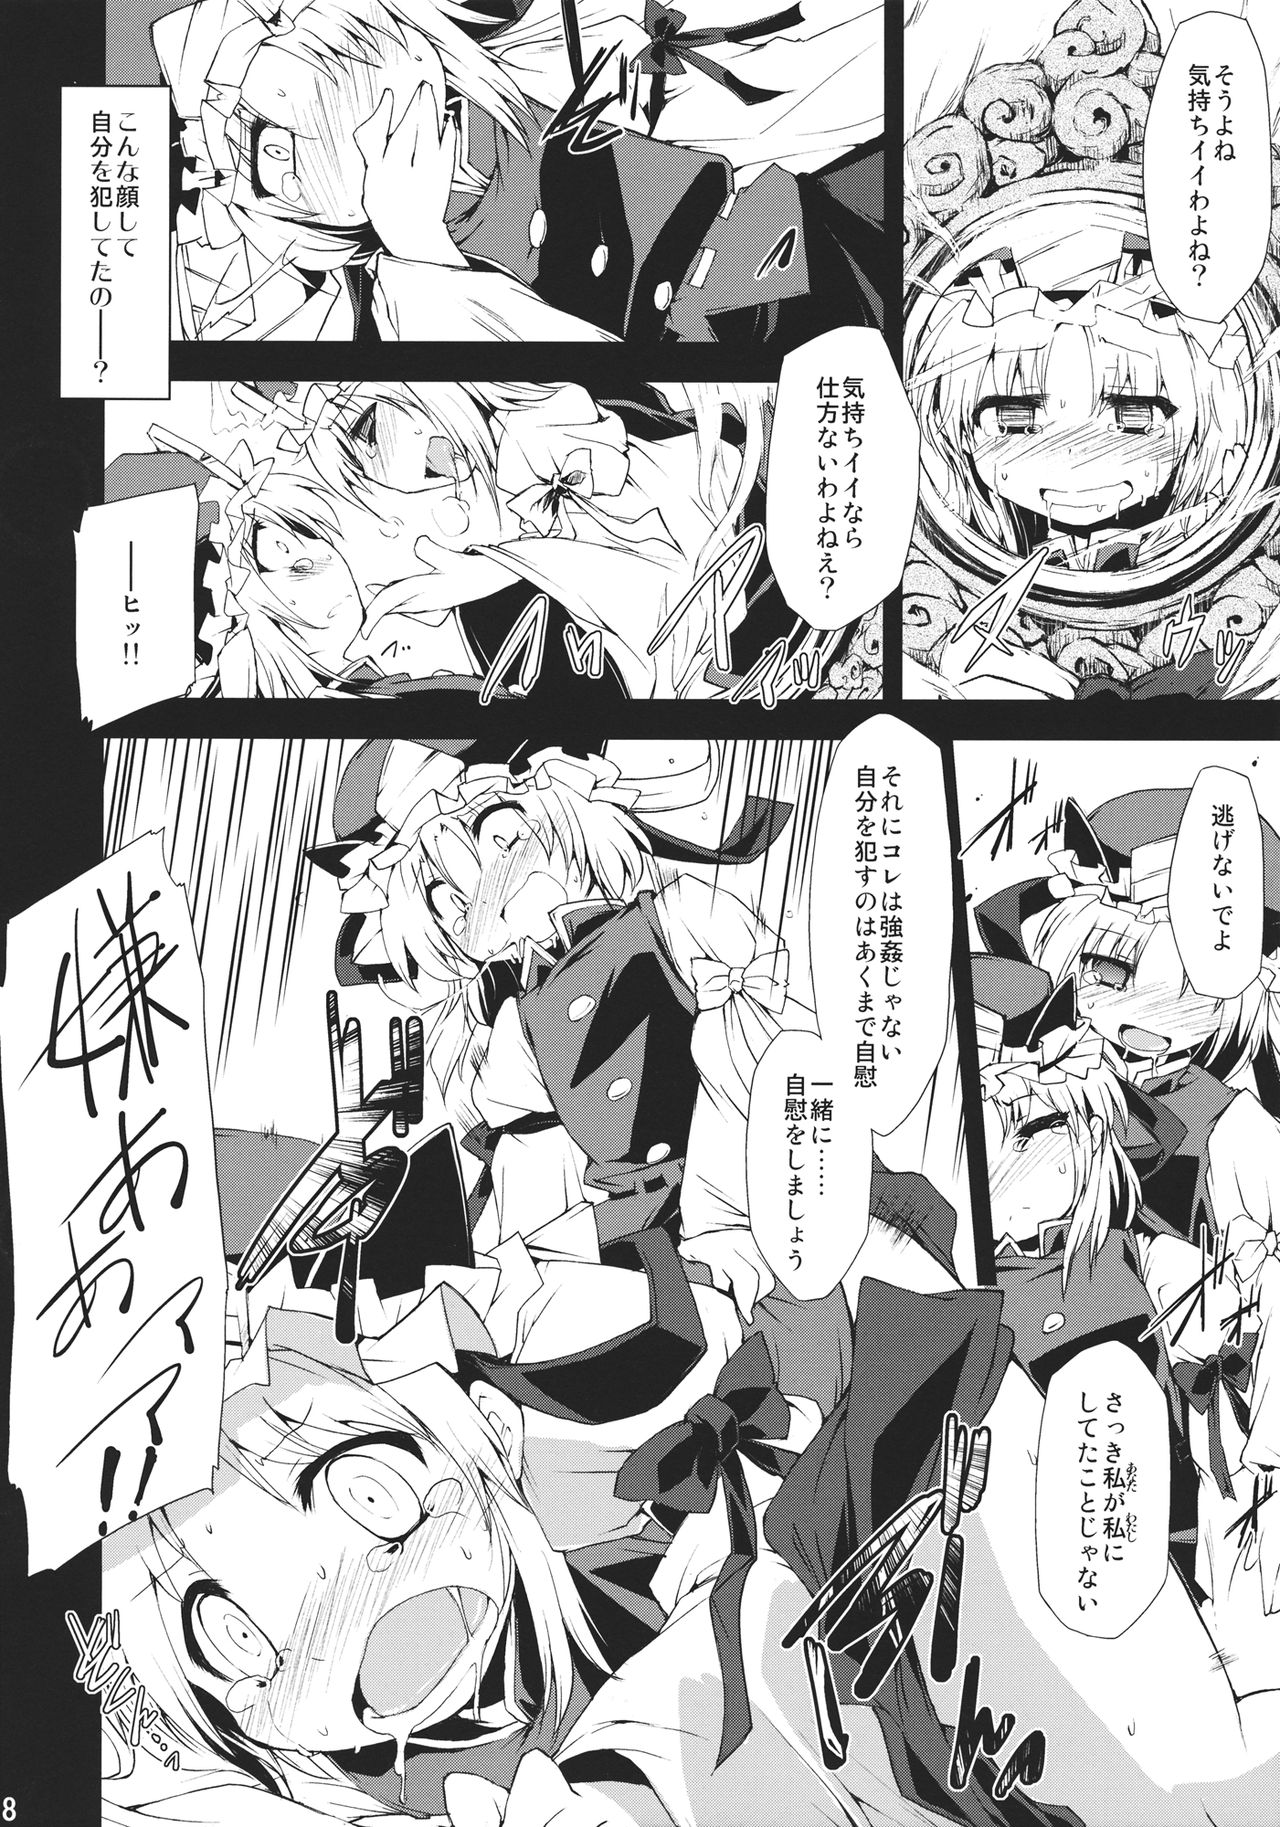 (C78) [Include (Foolest)] Saimin Ihen 5 ~Blind Justice~ (Touhou Project) (C78) [IncluDe (ふぅりすと)] 催眠異変 伍 ~Blind Justice~ (東方Project)